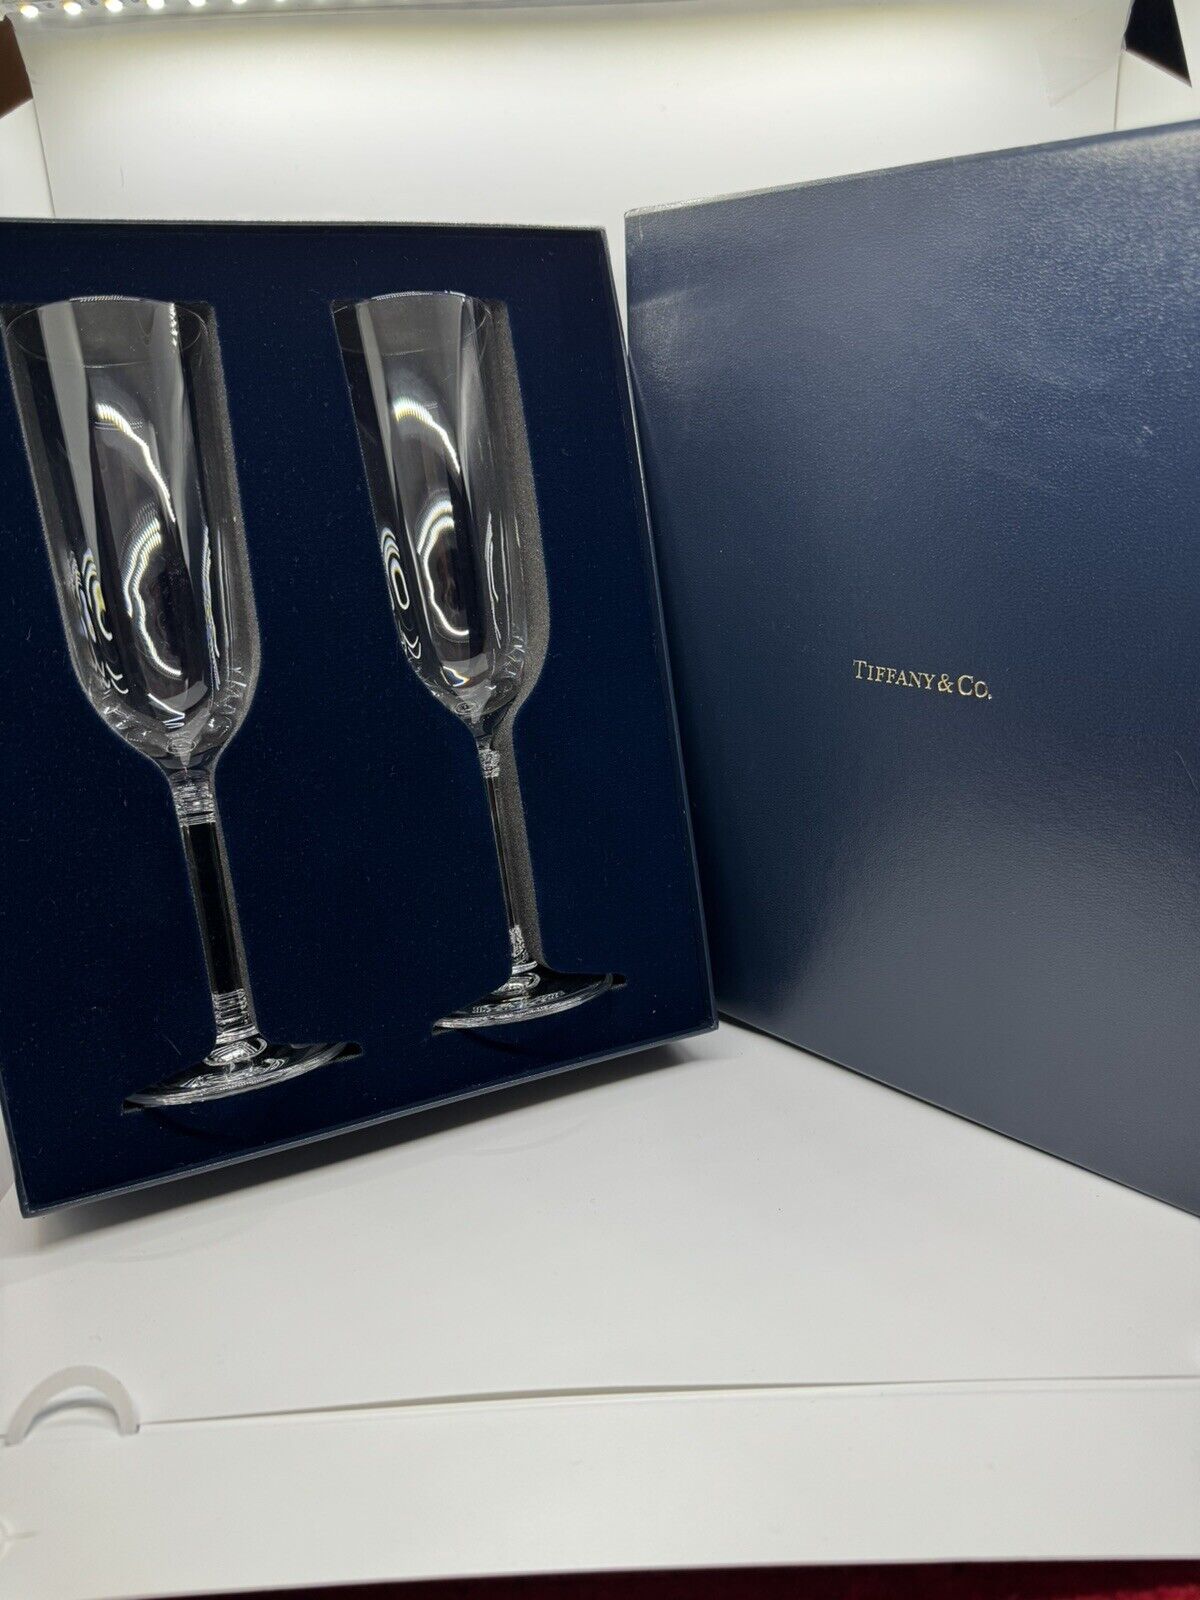 Tiffany And Co Crystal Glasses 